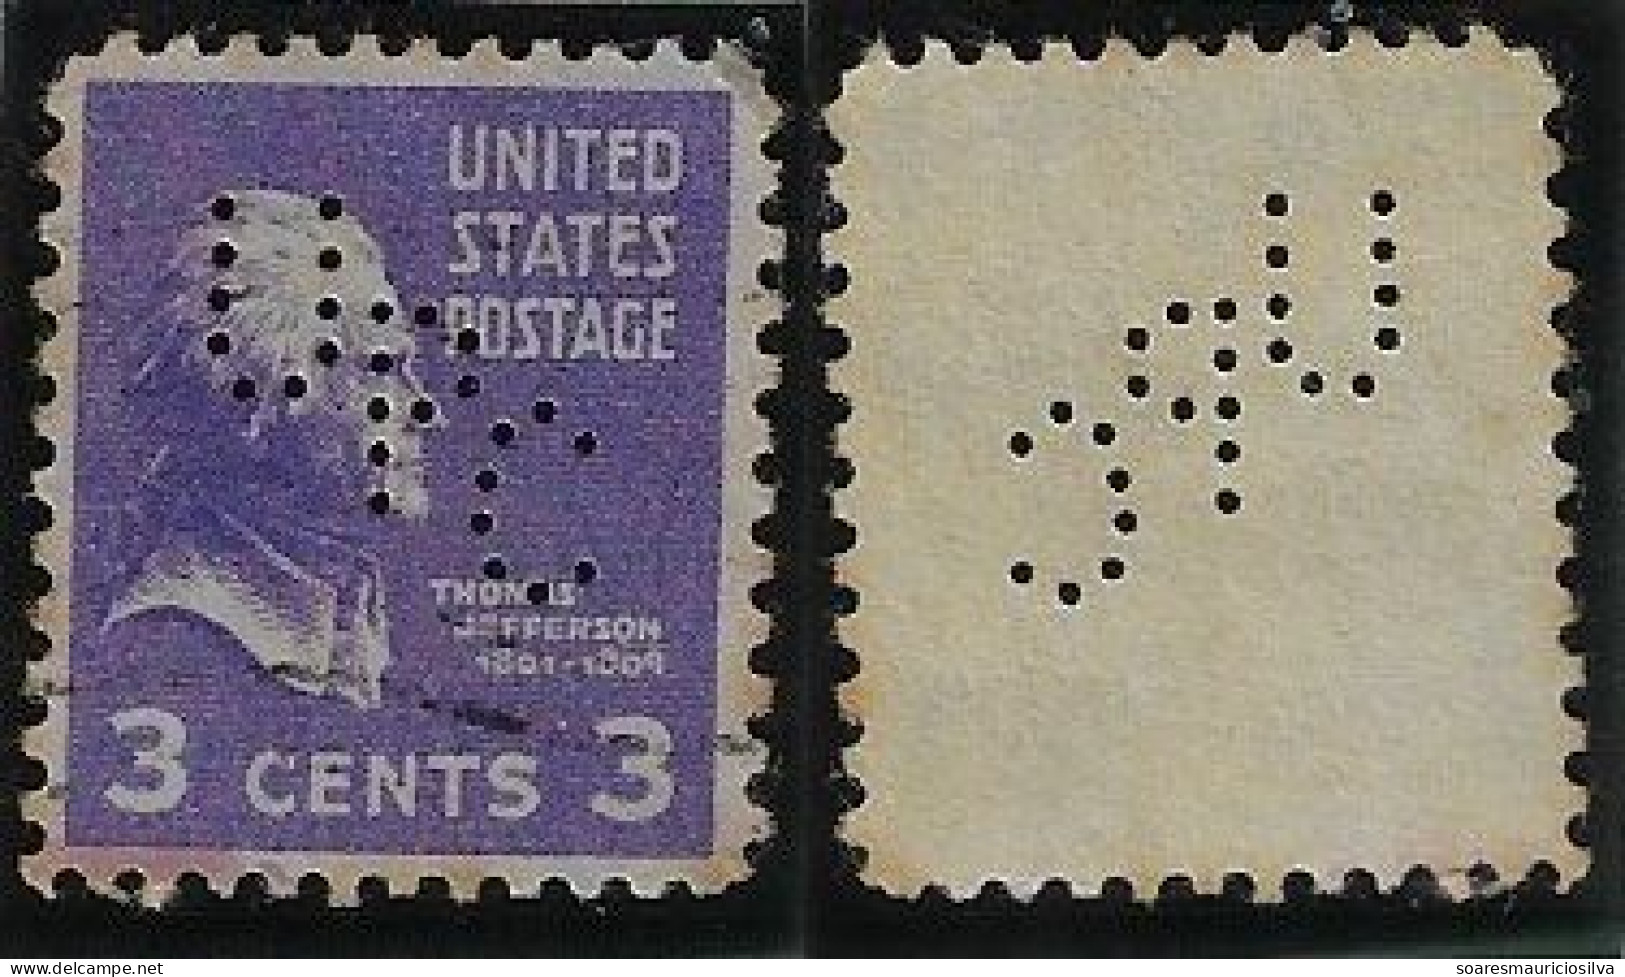 USA United States 1931/1954 Stamp With Perfin UPC By The Union Pacific Coal Company From Rock Springs Lochung Perfore - Perfins